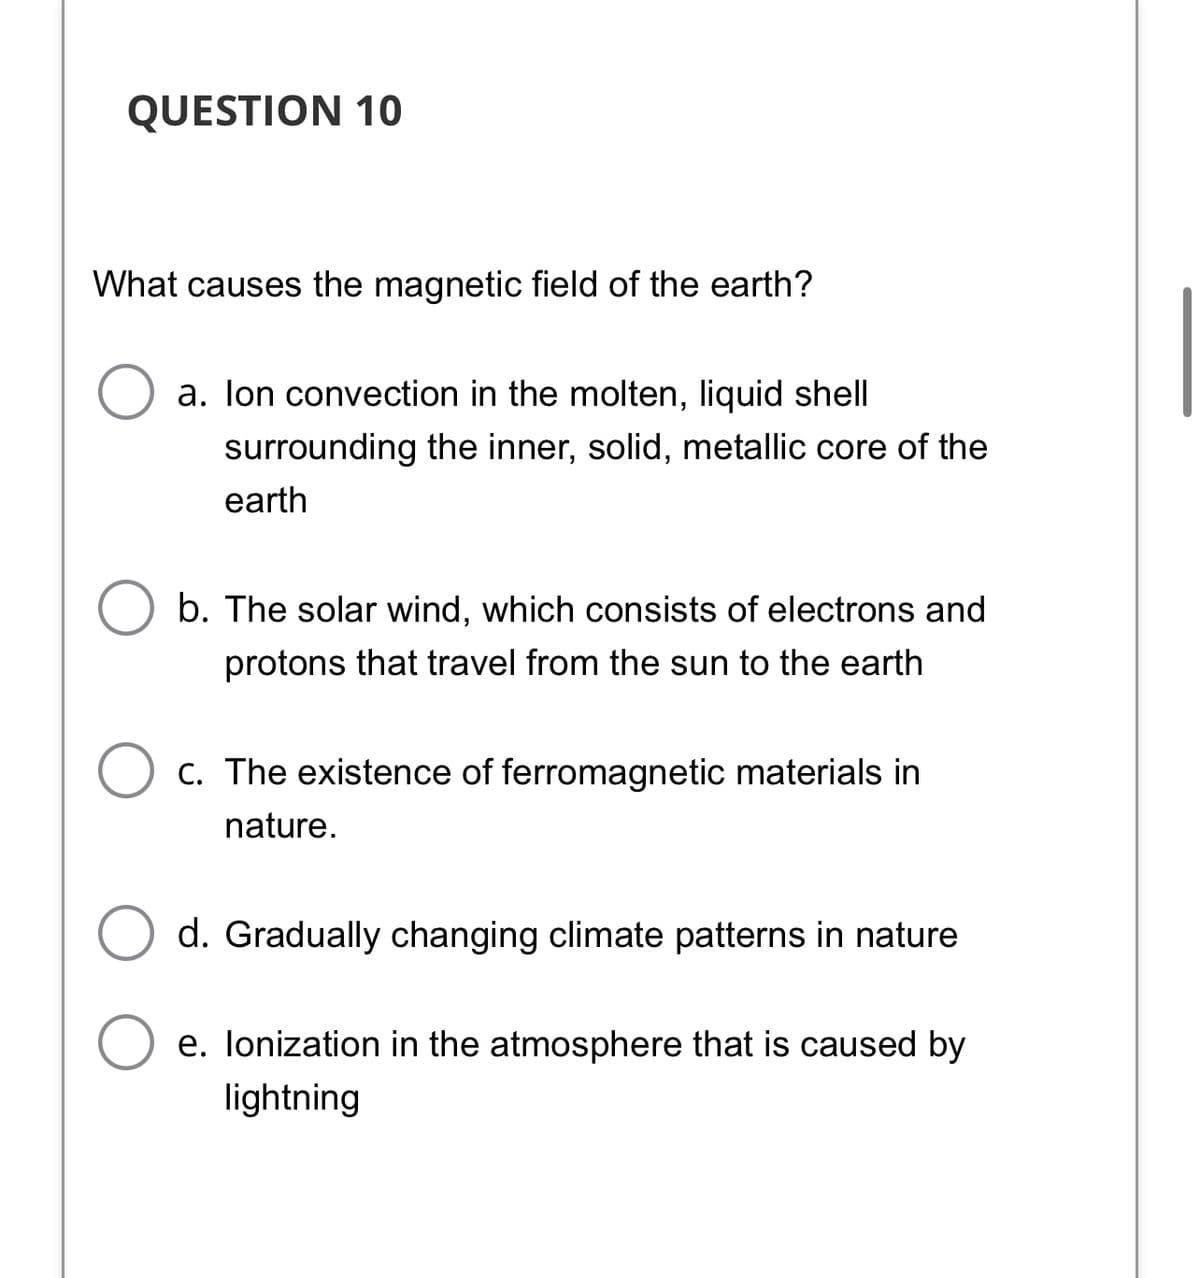 QUESTION 10
What causes the magnetic field of the earth?
a. lon convection in the molten, liquid shell
surrounding the inner, solid, metallic core of the
earth
b. The solar wind, which consists of electrons and
protons that travel from the sun to the earth
C. The existence of ferromagnetic materials in
nature.
d. Gradually changing climate patterns in nature
e. Ionization in the atmosphere that is caused by
lightning
